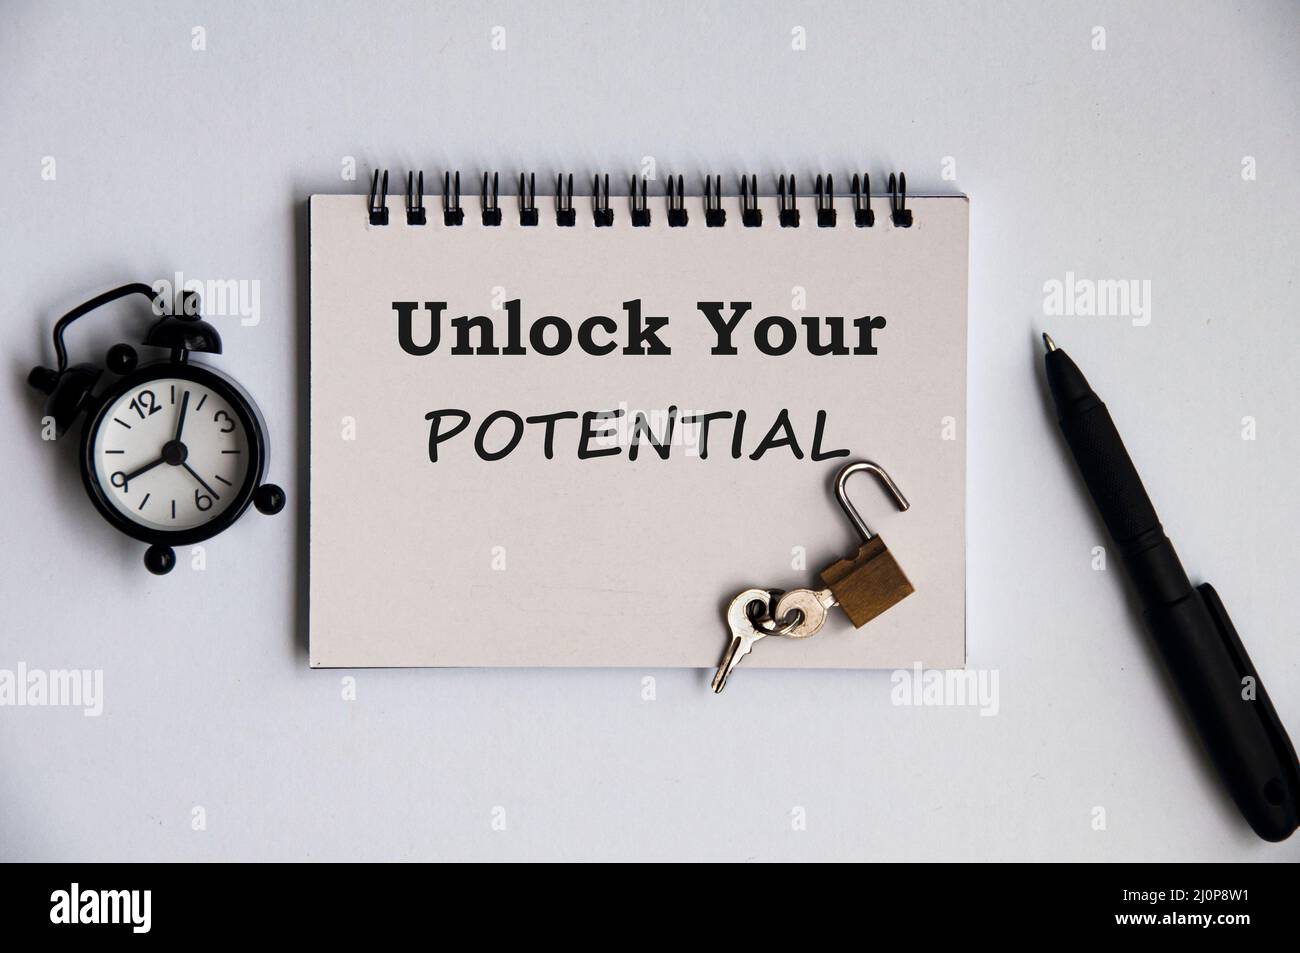 Motivational quote notepad - Unlock your potential. Motivational and inspirational concept Stock Photo